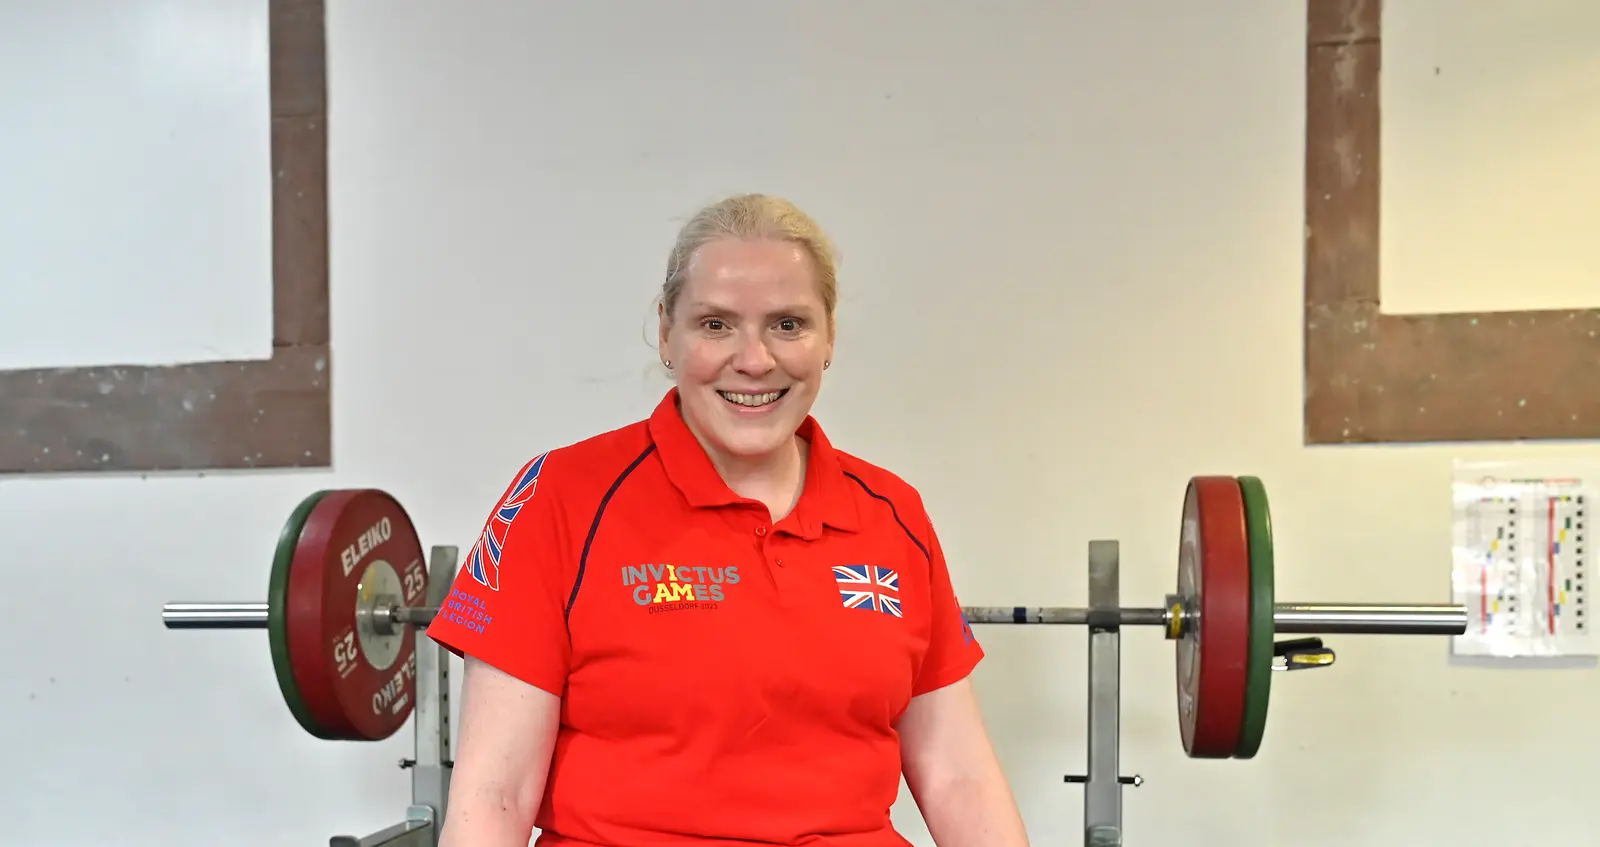 Amanda in a red Invictus Games Team UK polo shirt. There is a barbell with weights on it behind her.